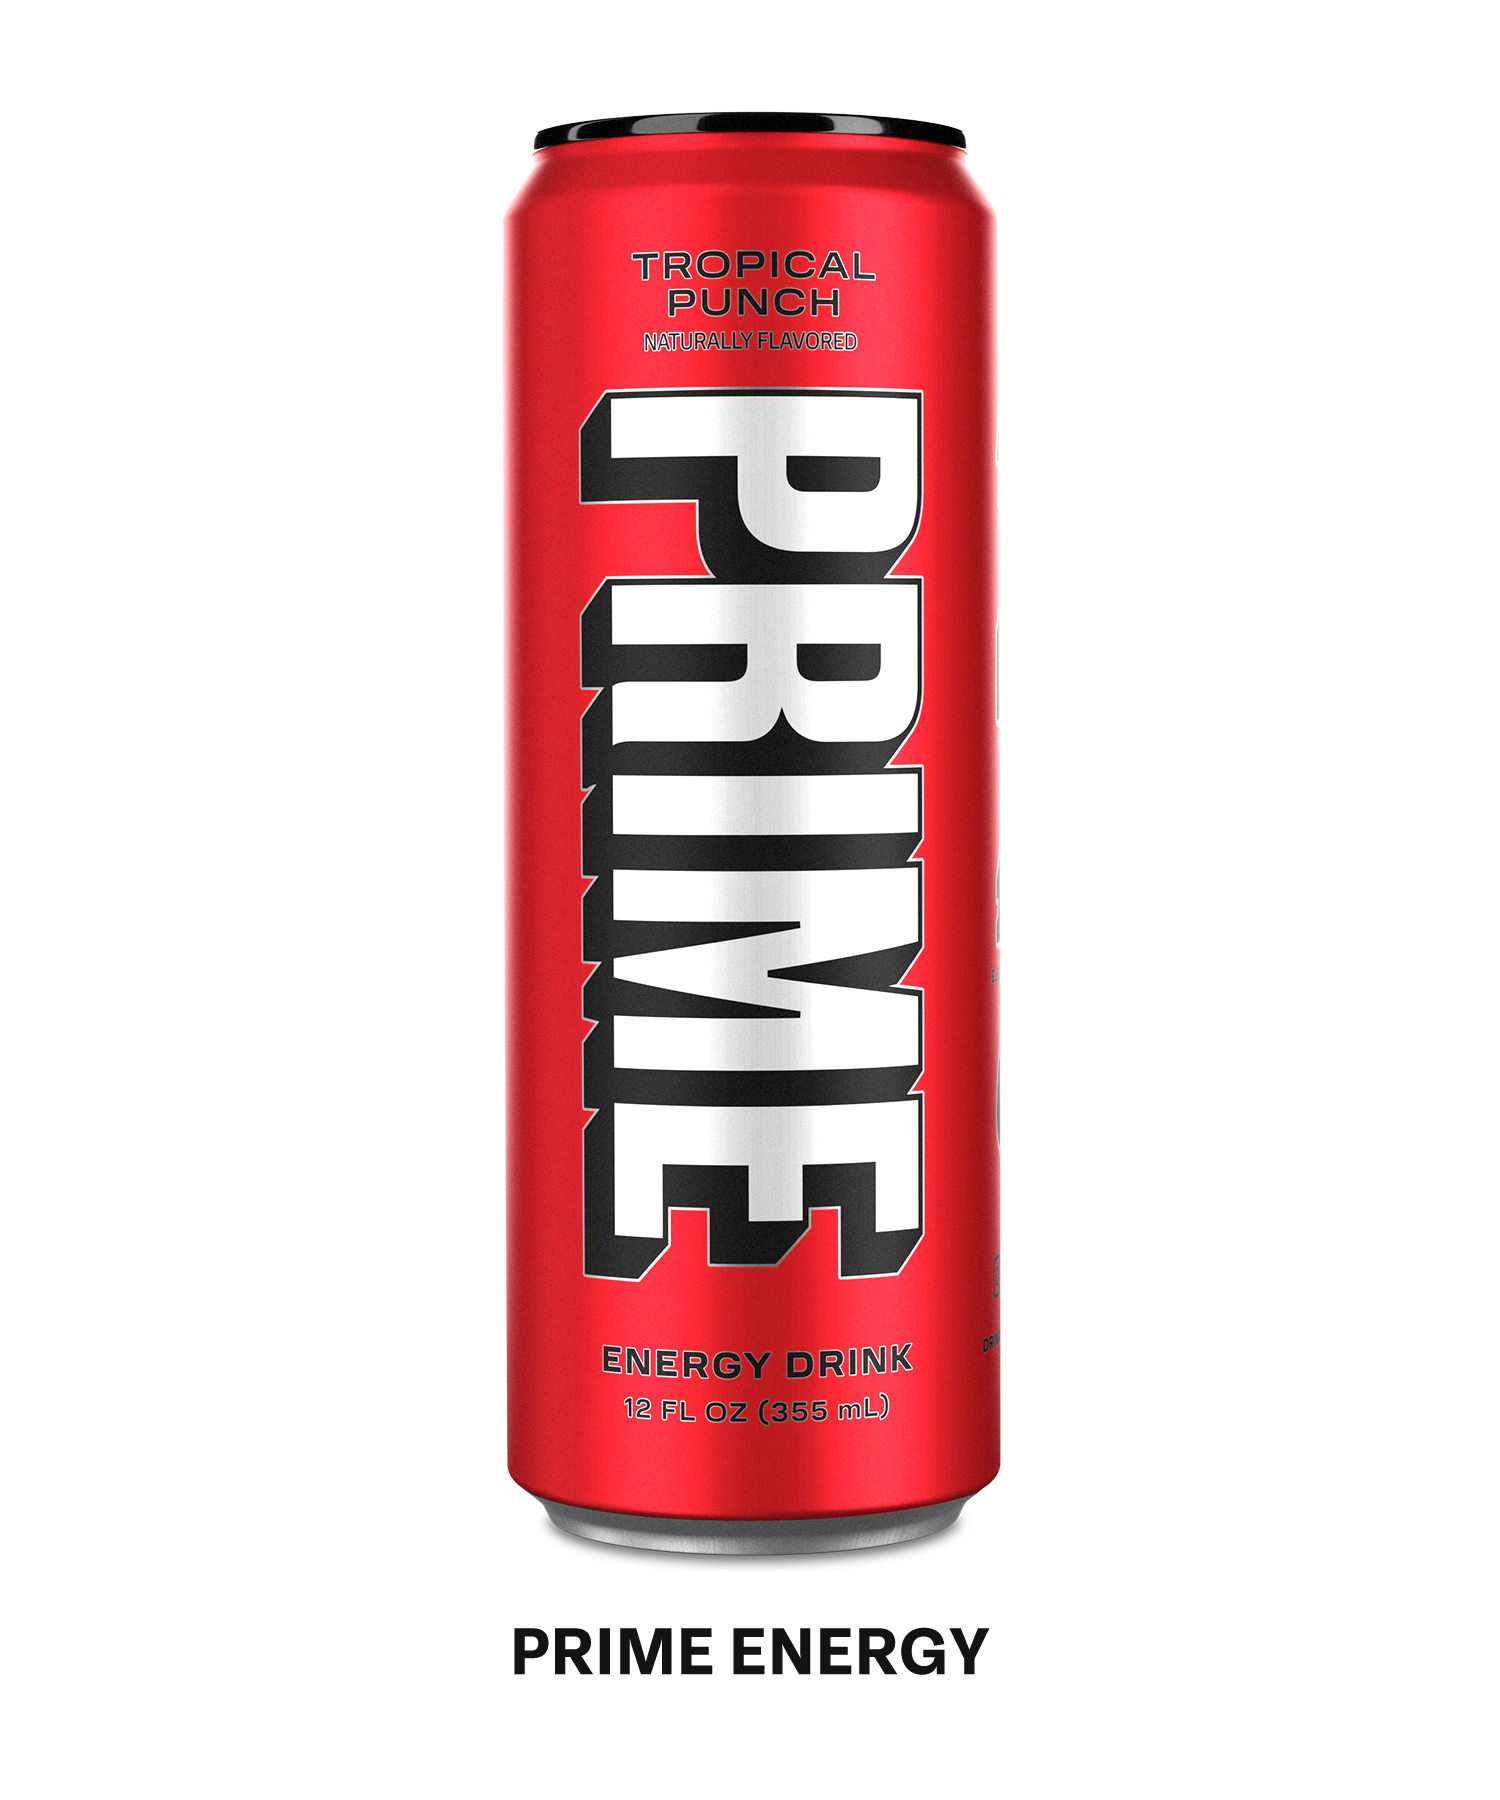 A Prime energy drink in flavor tropical punch.